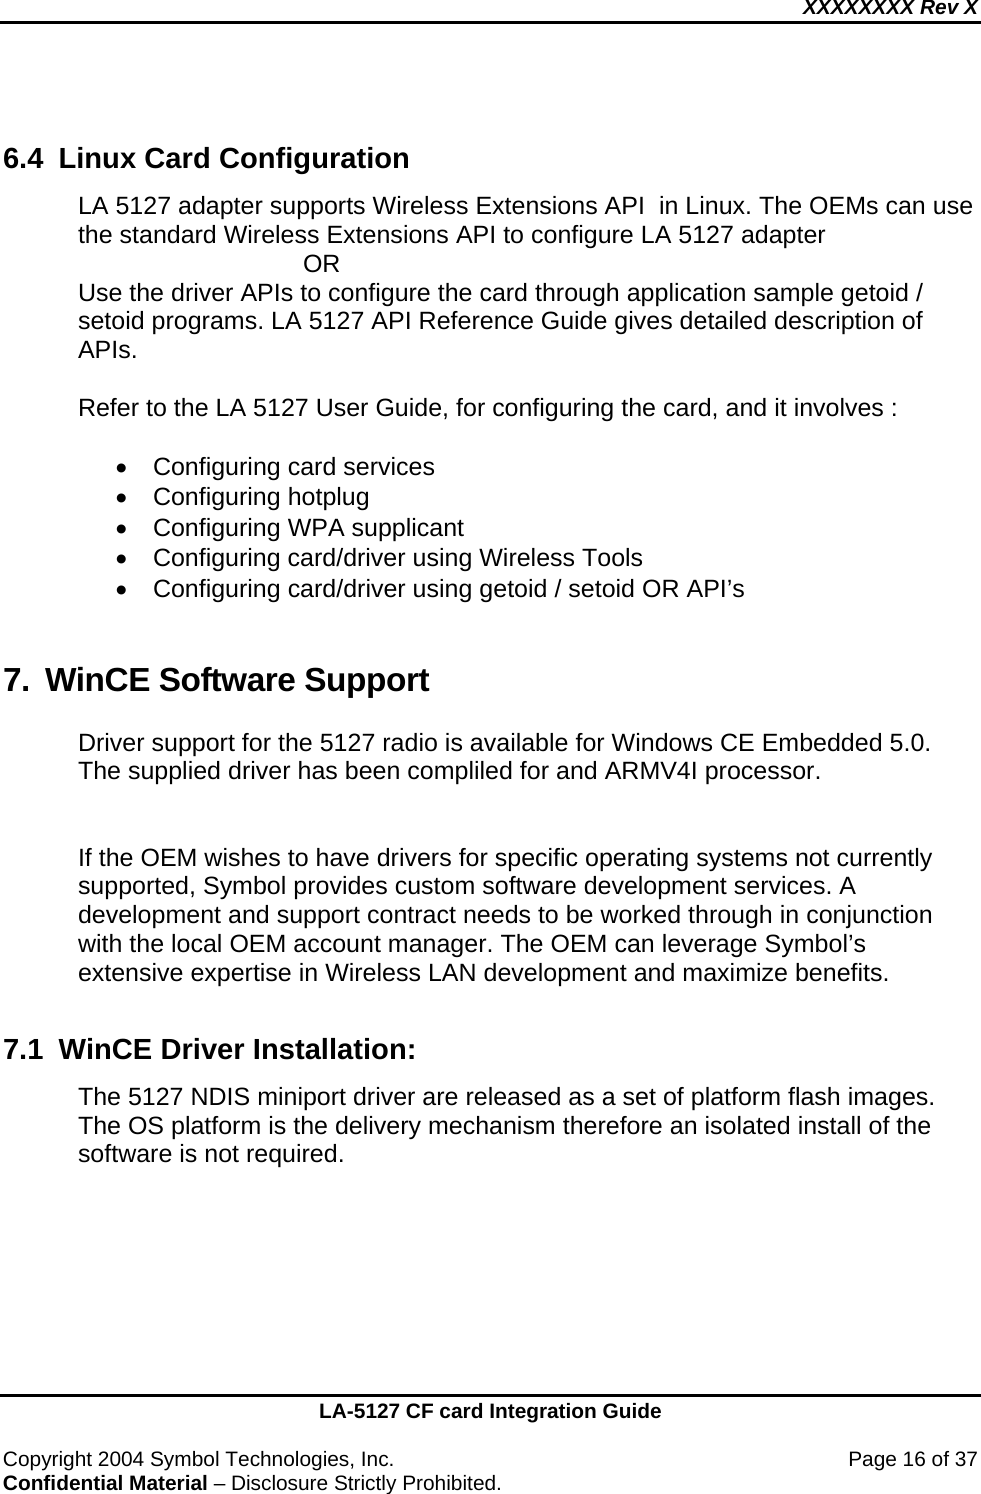 XXXXXXXX Rev X    LA-5127 CF card Integration Guide  Copyright 2004 Symbol Technologies, Inc.    Page 16 of 37 Confidential Material – Disclosure Strictly Prohibited.  6.4  Linux Card Configuration LA 5127 adapter supports Wireless Extensions API  in Linux. The OEMs can use the standard Wireless Extensions API to configure LA 5127 adapter                       OR Use the driver APIs to configure the card through application sample getoid / setoid programs. LA 5127 API Reference Guide gives detailed description of APIs.  Refer to the LA 5127 User Guide, for configuring the card, and it involves :  •  Configuring card services • Configuring hotplug •  Configuring WPA supplicant •  Configuring card/driver using Wireless Tools •  Configuring card/driver using getoid / setoid OR API’s  7. WinCE Software Support Driver support for the 5127 radio is available for Windows CE Embedded 5.0.  The supplied driver has been compliled for and ARMV4I processor.   If the OEM wishes to have drivers for specific operating systems not currently supported, Symbol provides custom software development services. A development and support contract needs to be worked through in conjunction with the local OEM account manager. The OEM can leverage Symbol’s extensive expertise in Wireless LAN development and maximize benefits.   7.1  WinCE Driver Installation: The 5127 NDIS miniport driver are released as a set of platform flash images.  The OS platform is the delivery mechanism therefore an isolated install of the software is not required. 